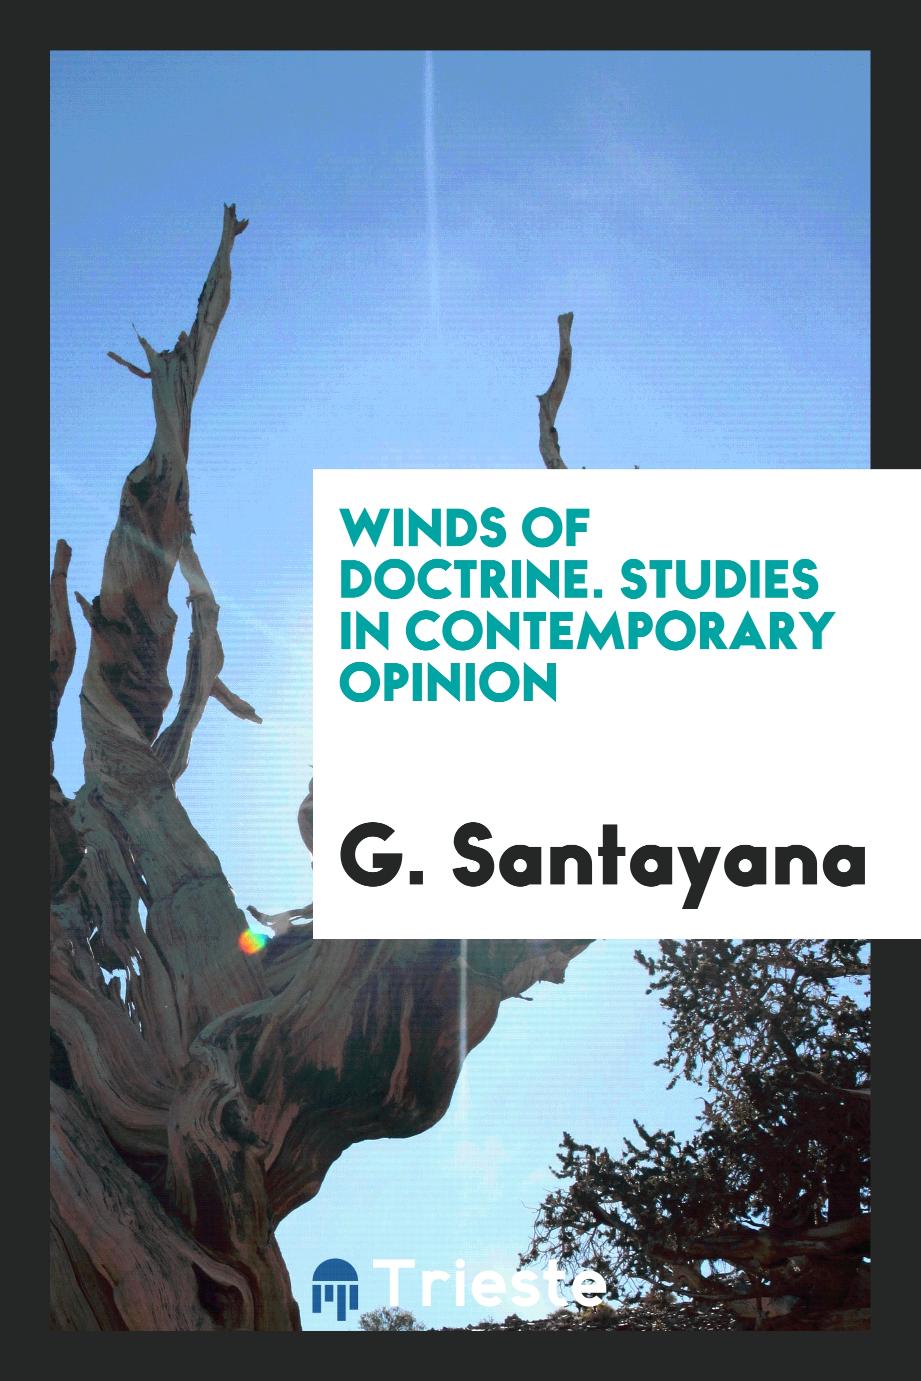 Winds of doctrine. Studies in contemporary opinion